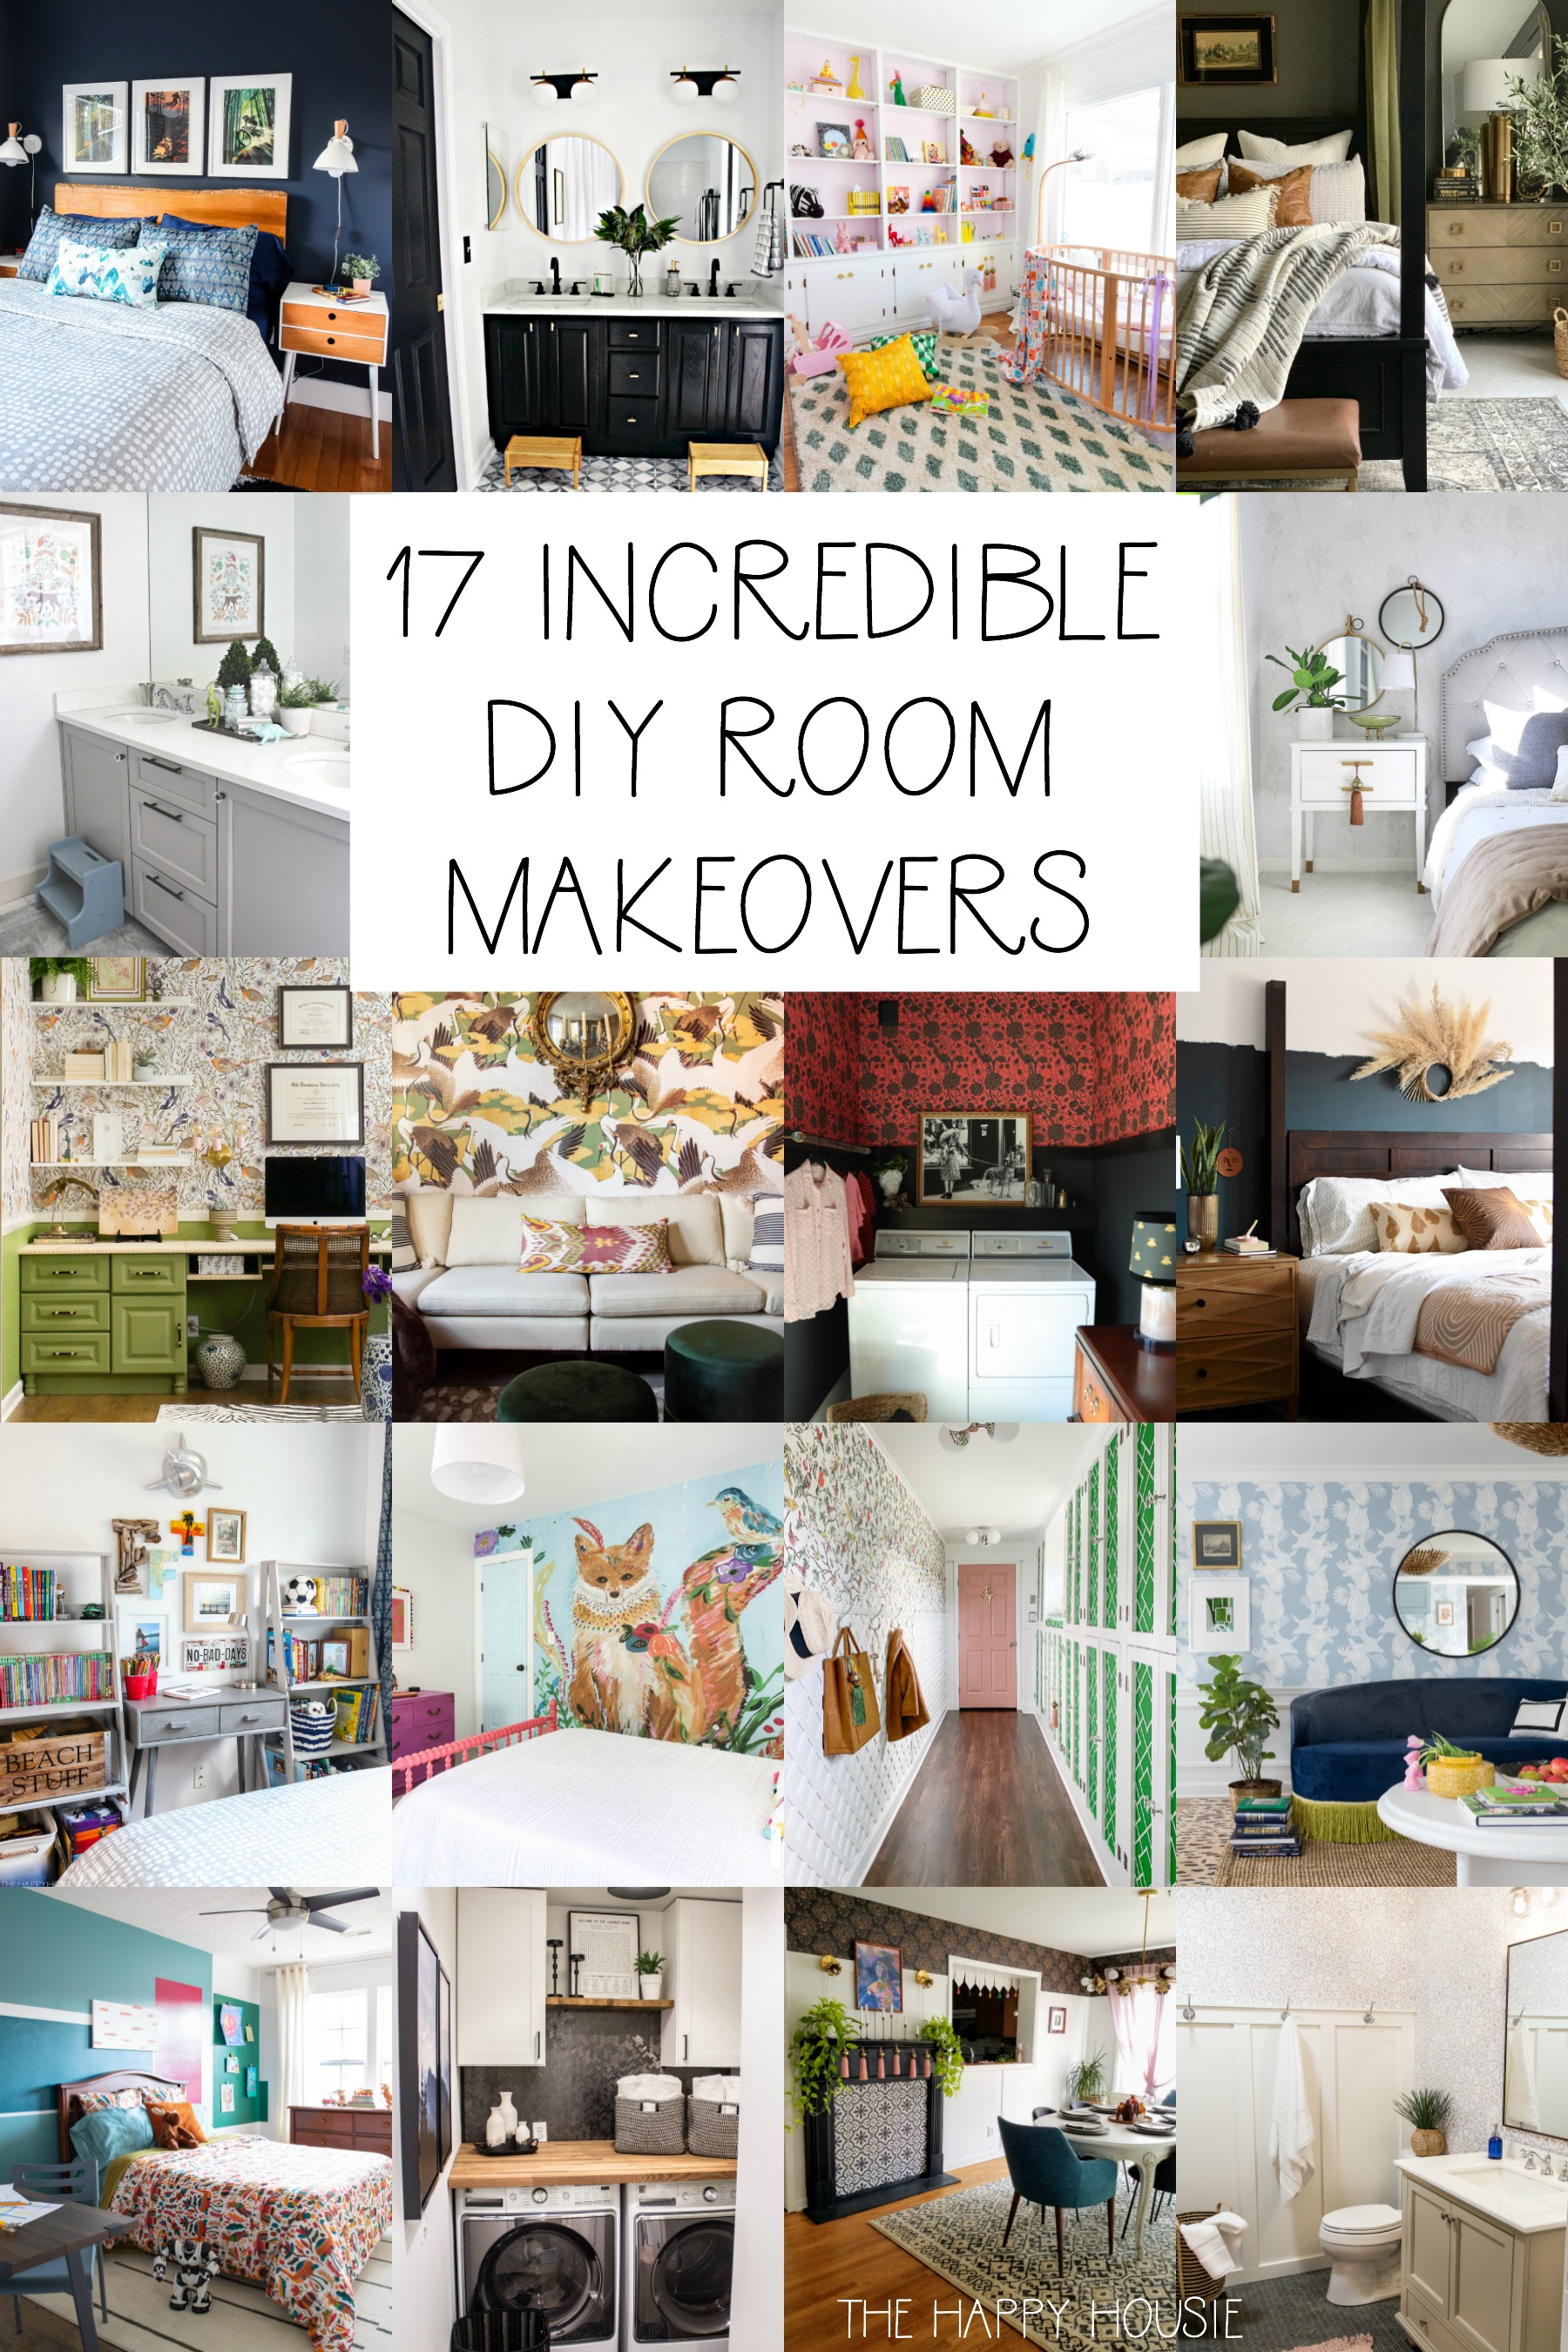 17 incredible DIY room makeovers poster.